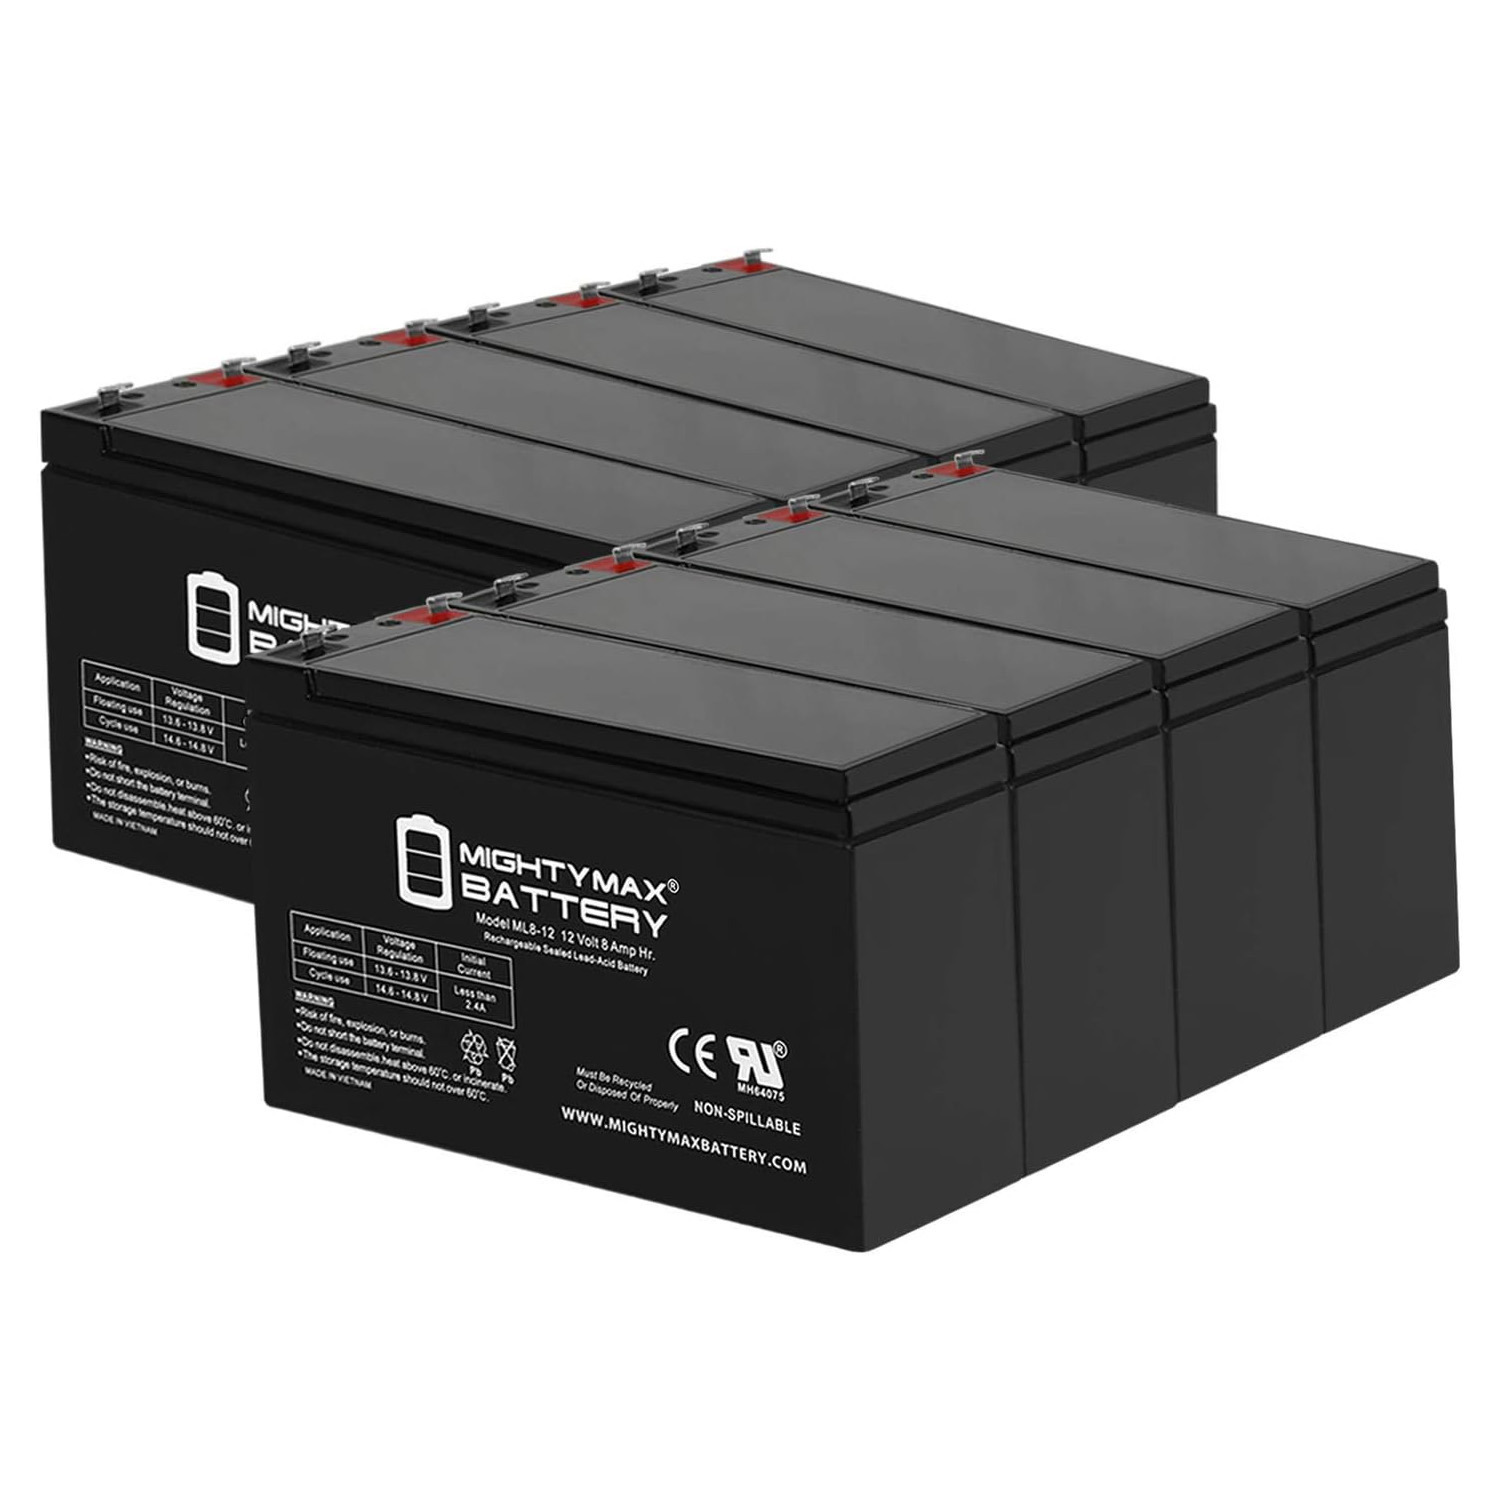 12V 8Ah SLA Replacement Battery for Exkate Powerboards X-24 - 8 Pack